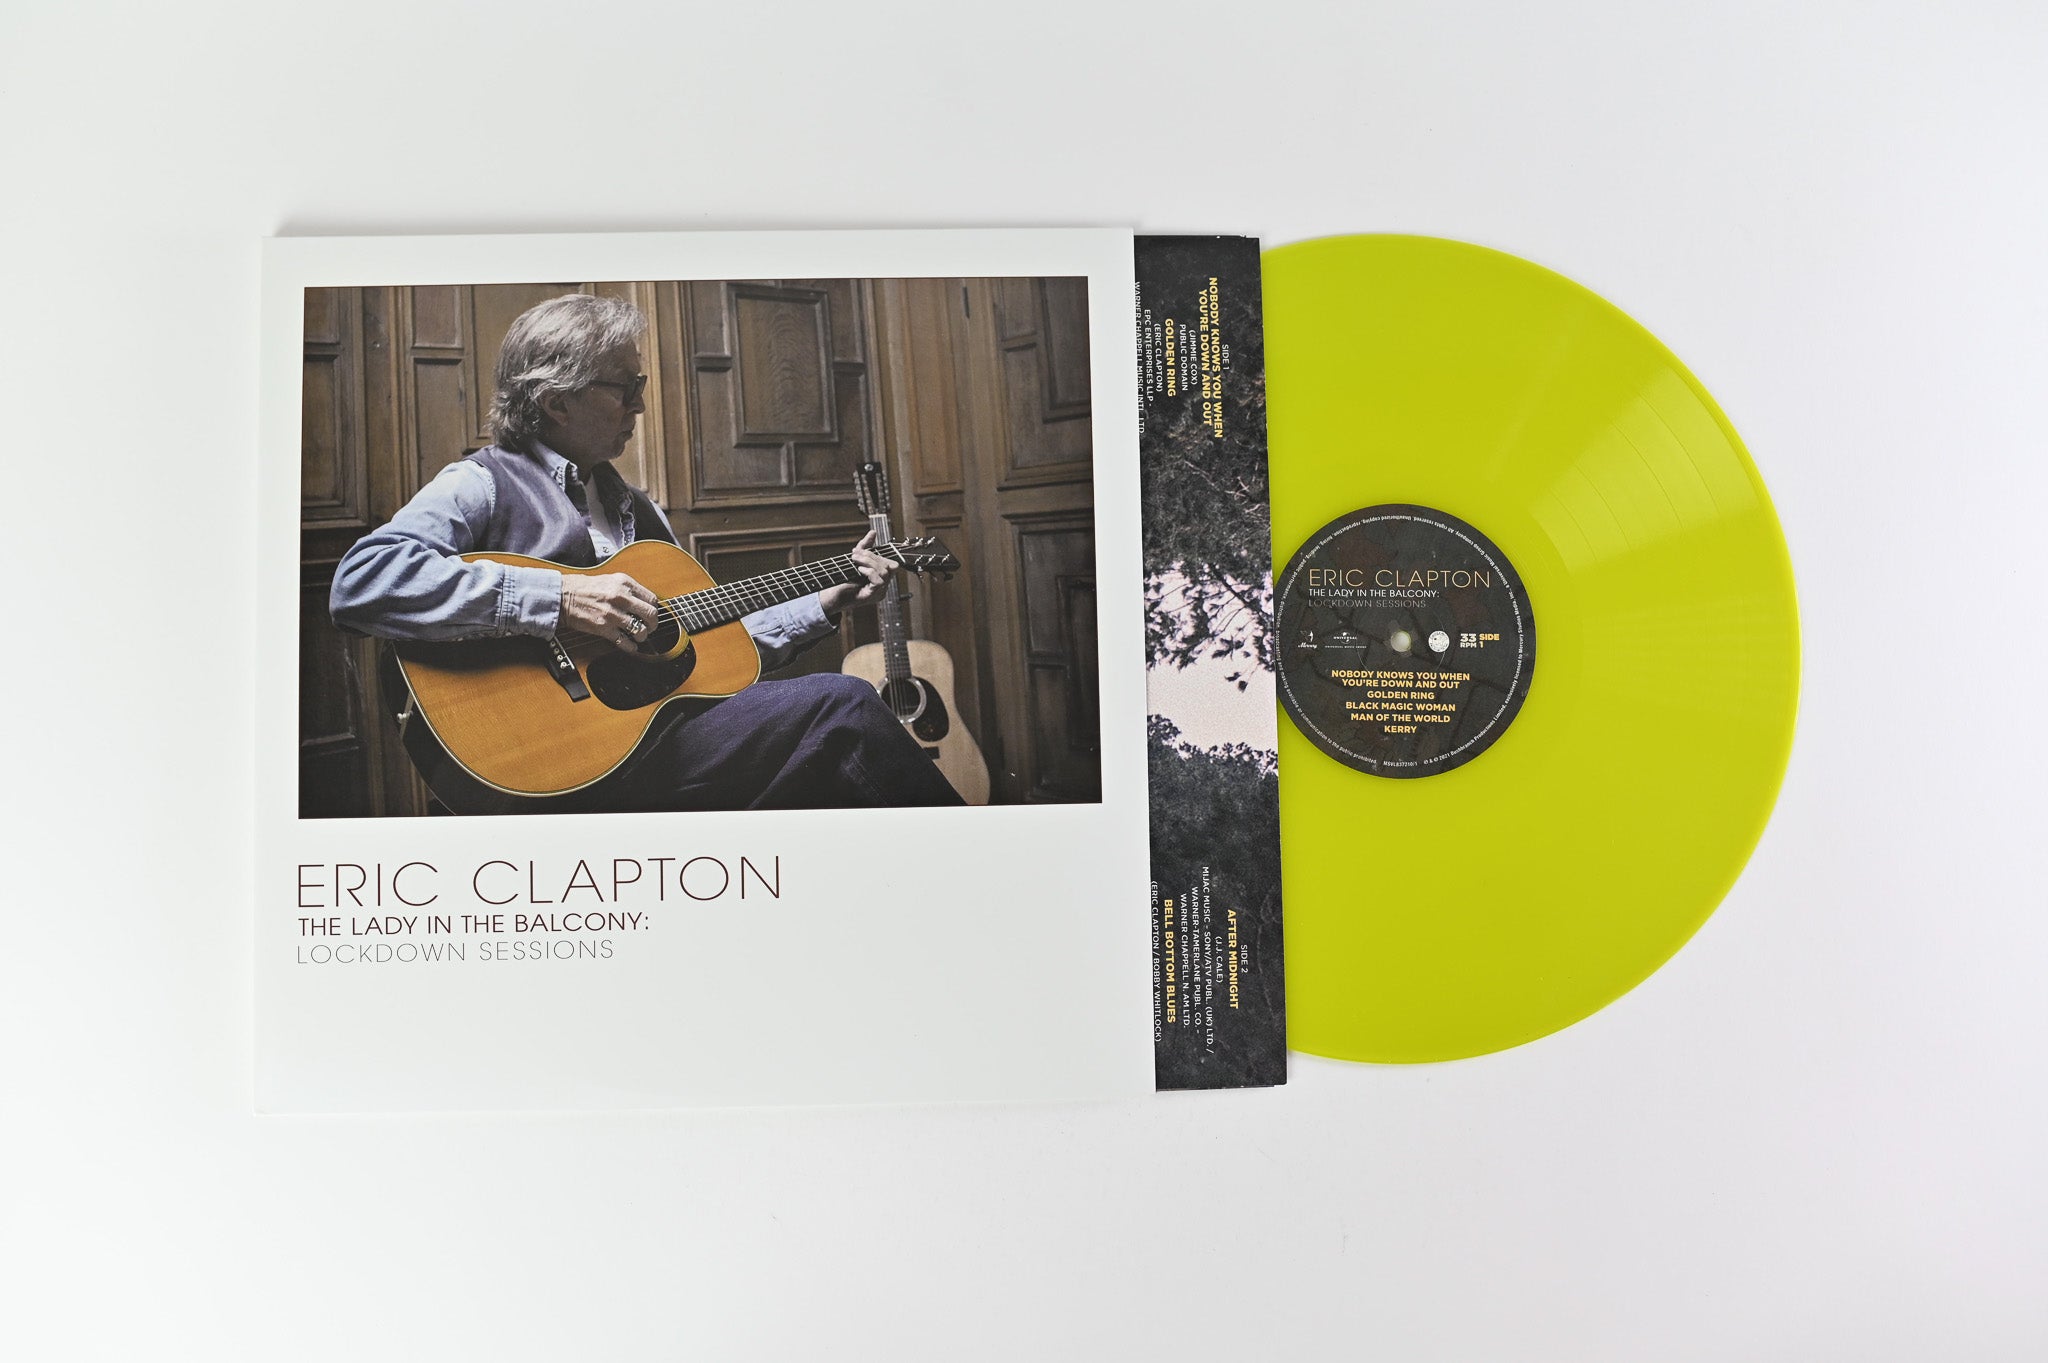 Eric Clapton - The Lady In The Balcony: Lockdown Sessions on Bushbranch Productions Yellow Translucent Vinyl